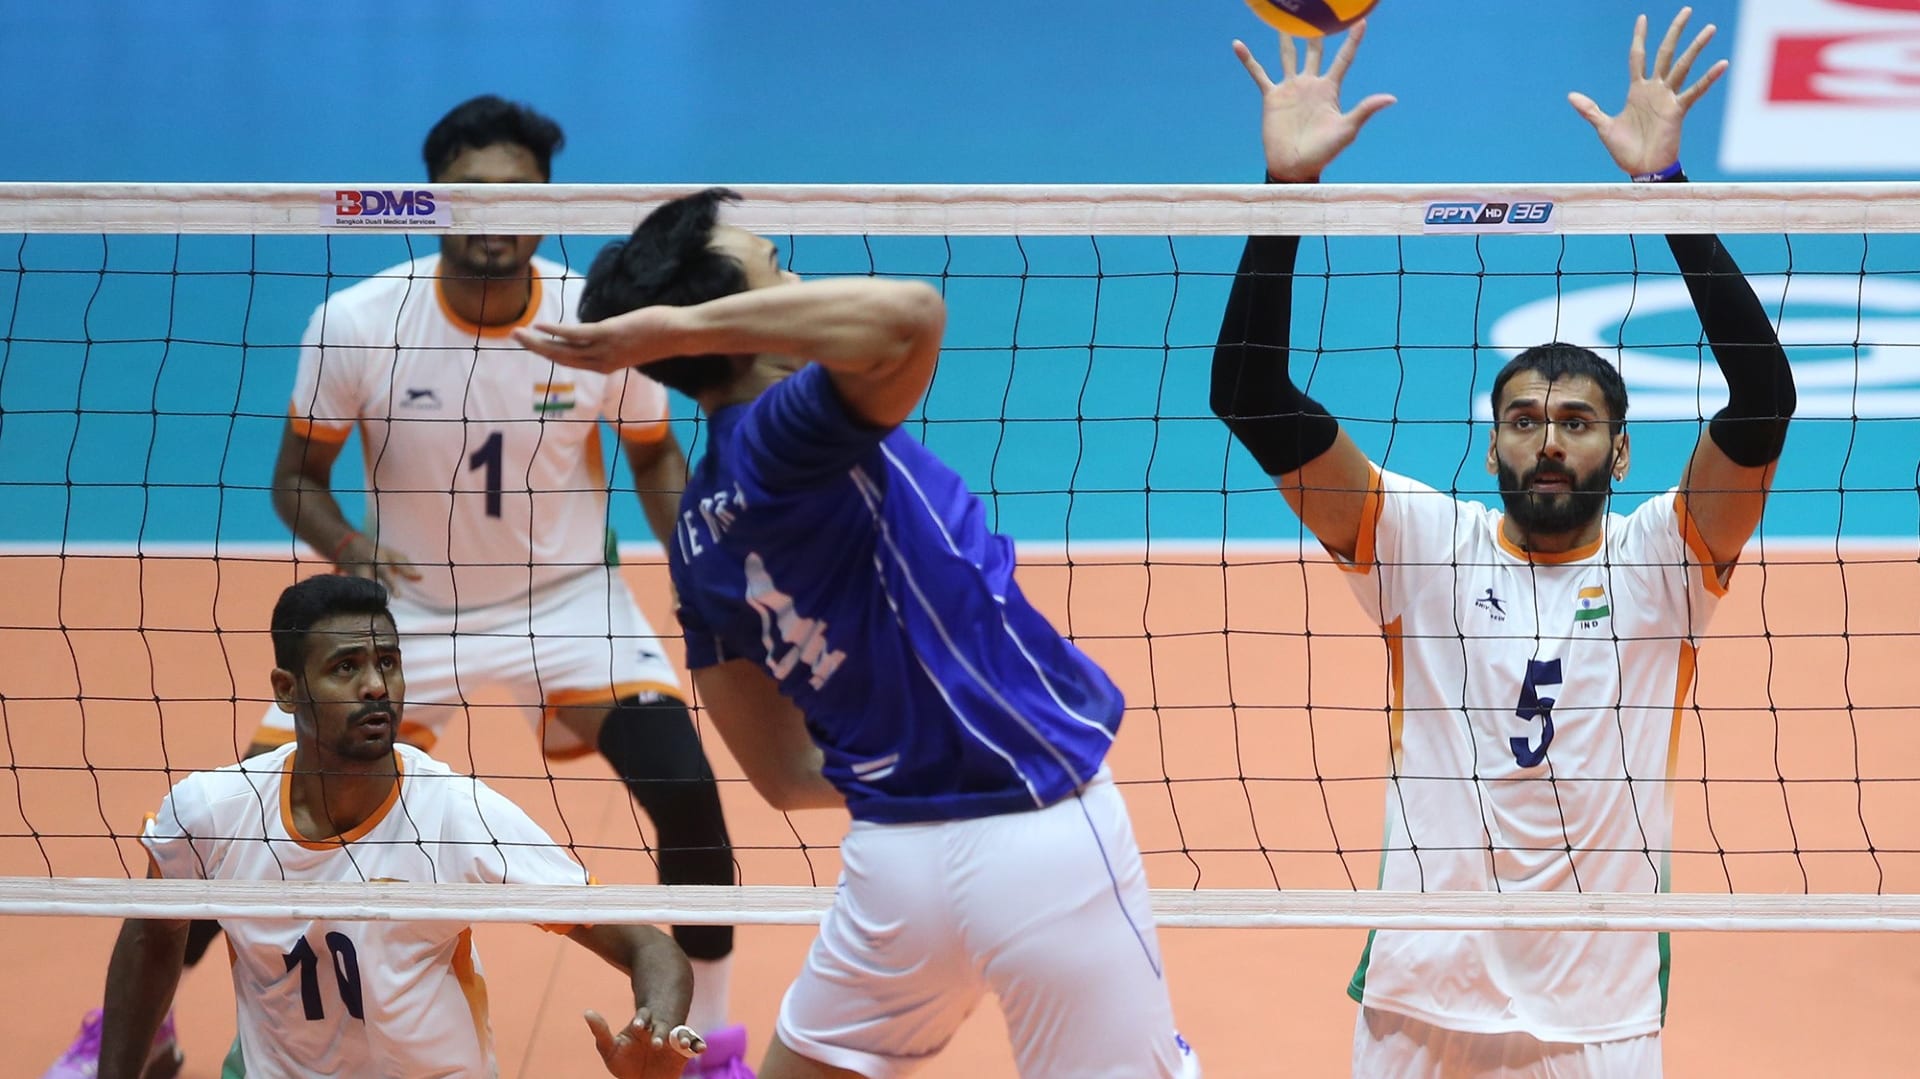 HOSTS AND DATES FOR FIVB VOLLEYBALL AGE GROUP WORLD CHAMPIONSHIPS 2023  CONFIRMED - Asian Volleyball Confederation